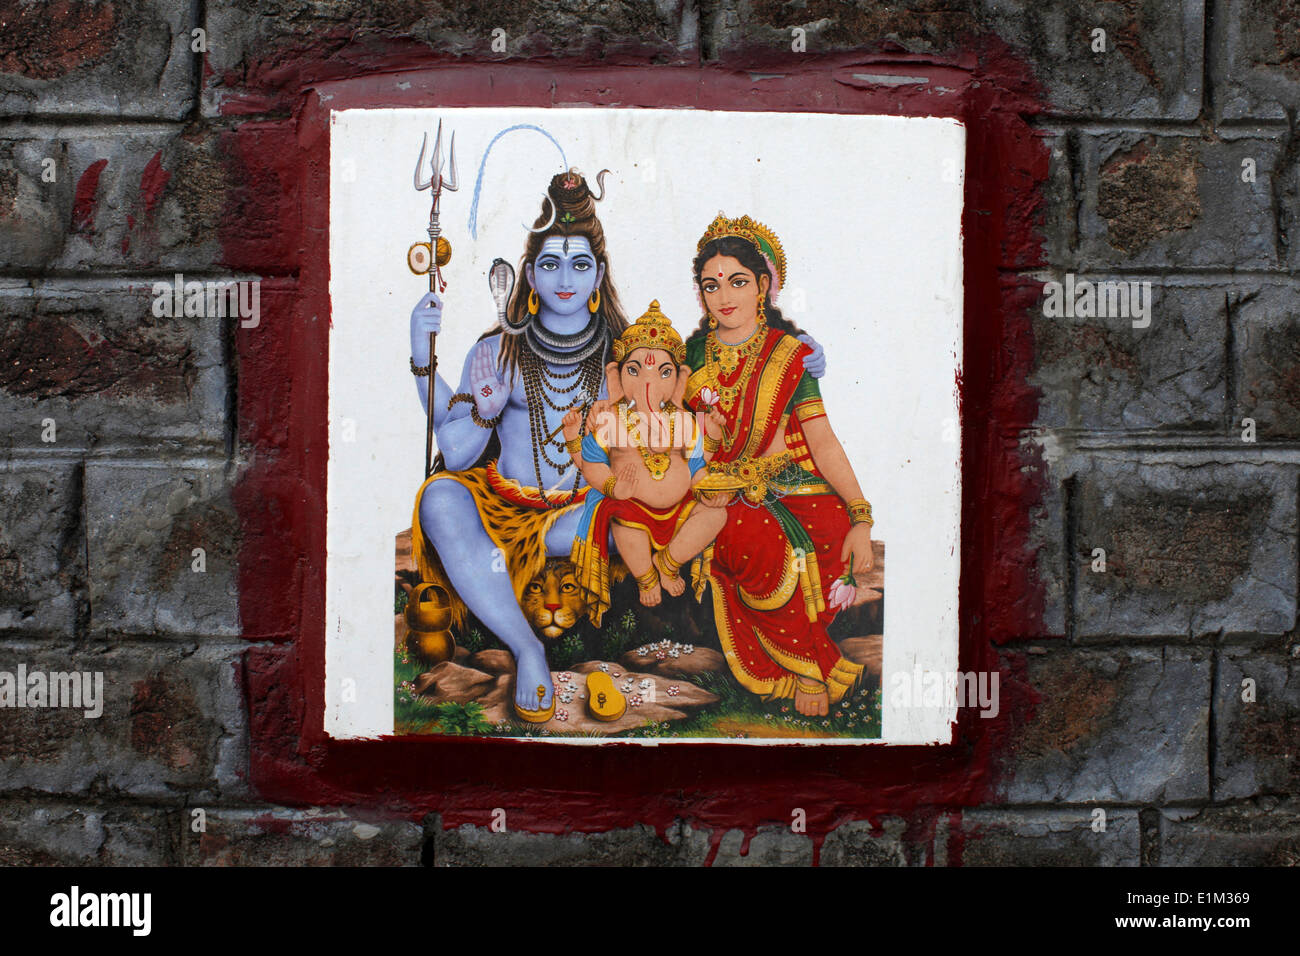 Shiva's family depicted on ceramic tile on a wall in Rishikesh Stock Photo